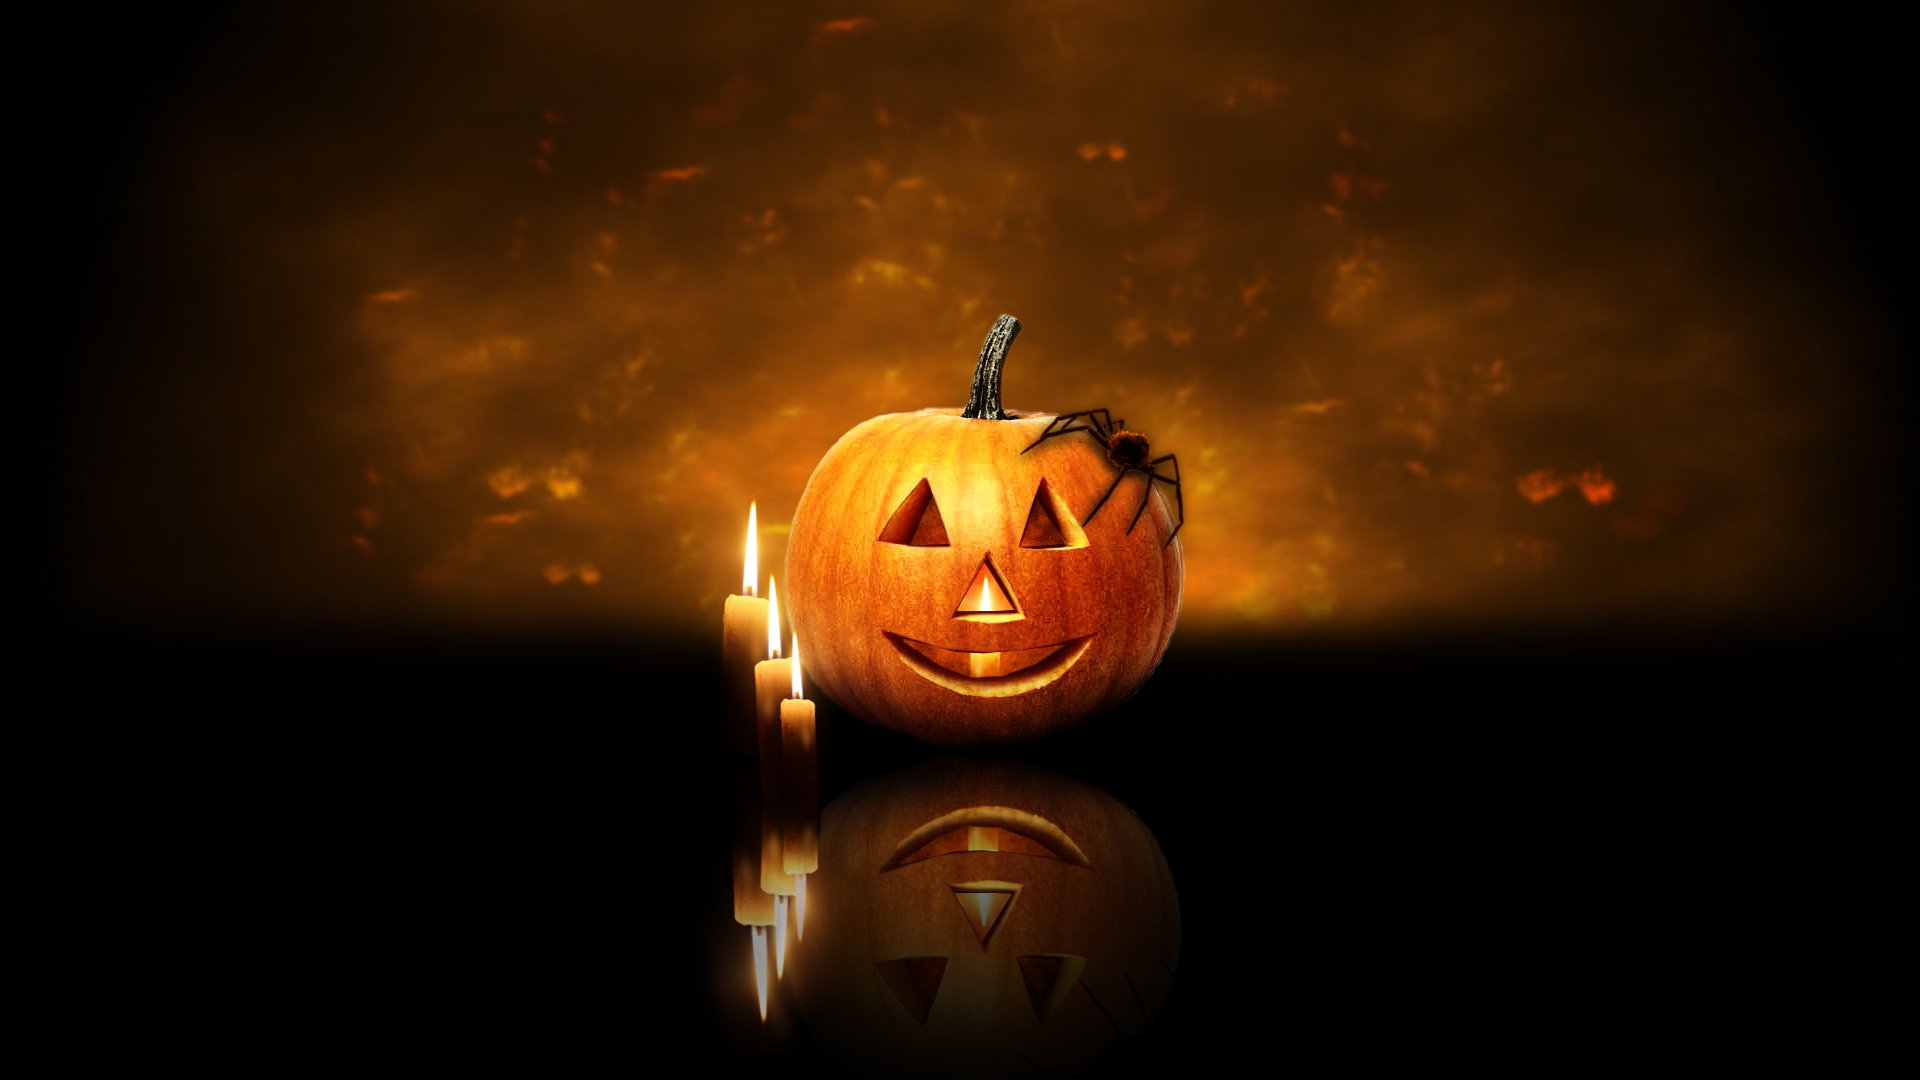 Scary Halloween 2012 Hd Wallpapers Pumpkins Witches HD Wallpapers Download Free Images Wallpaper [wallpaper981.blogspot.com]